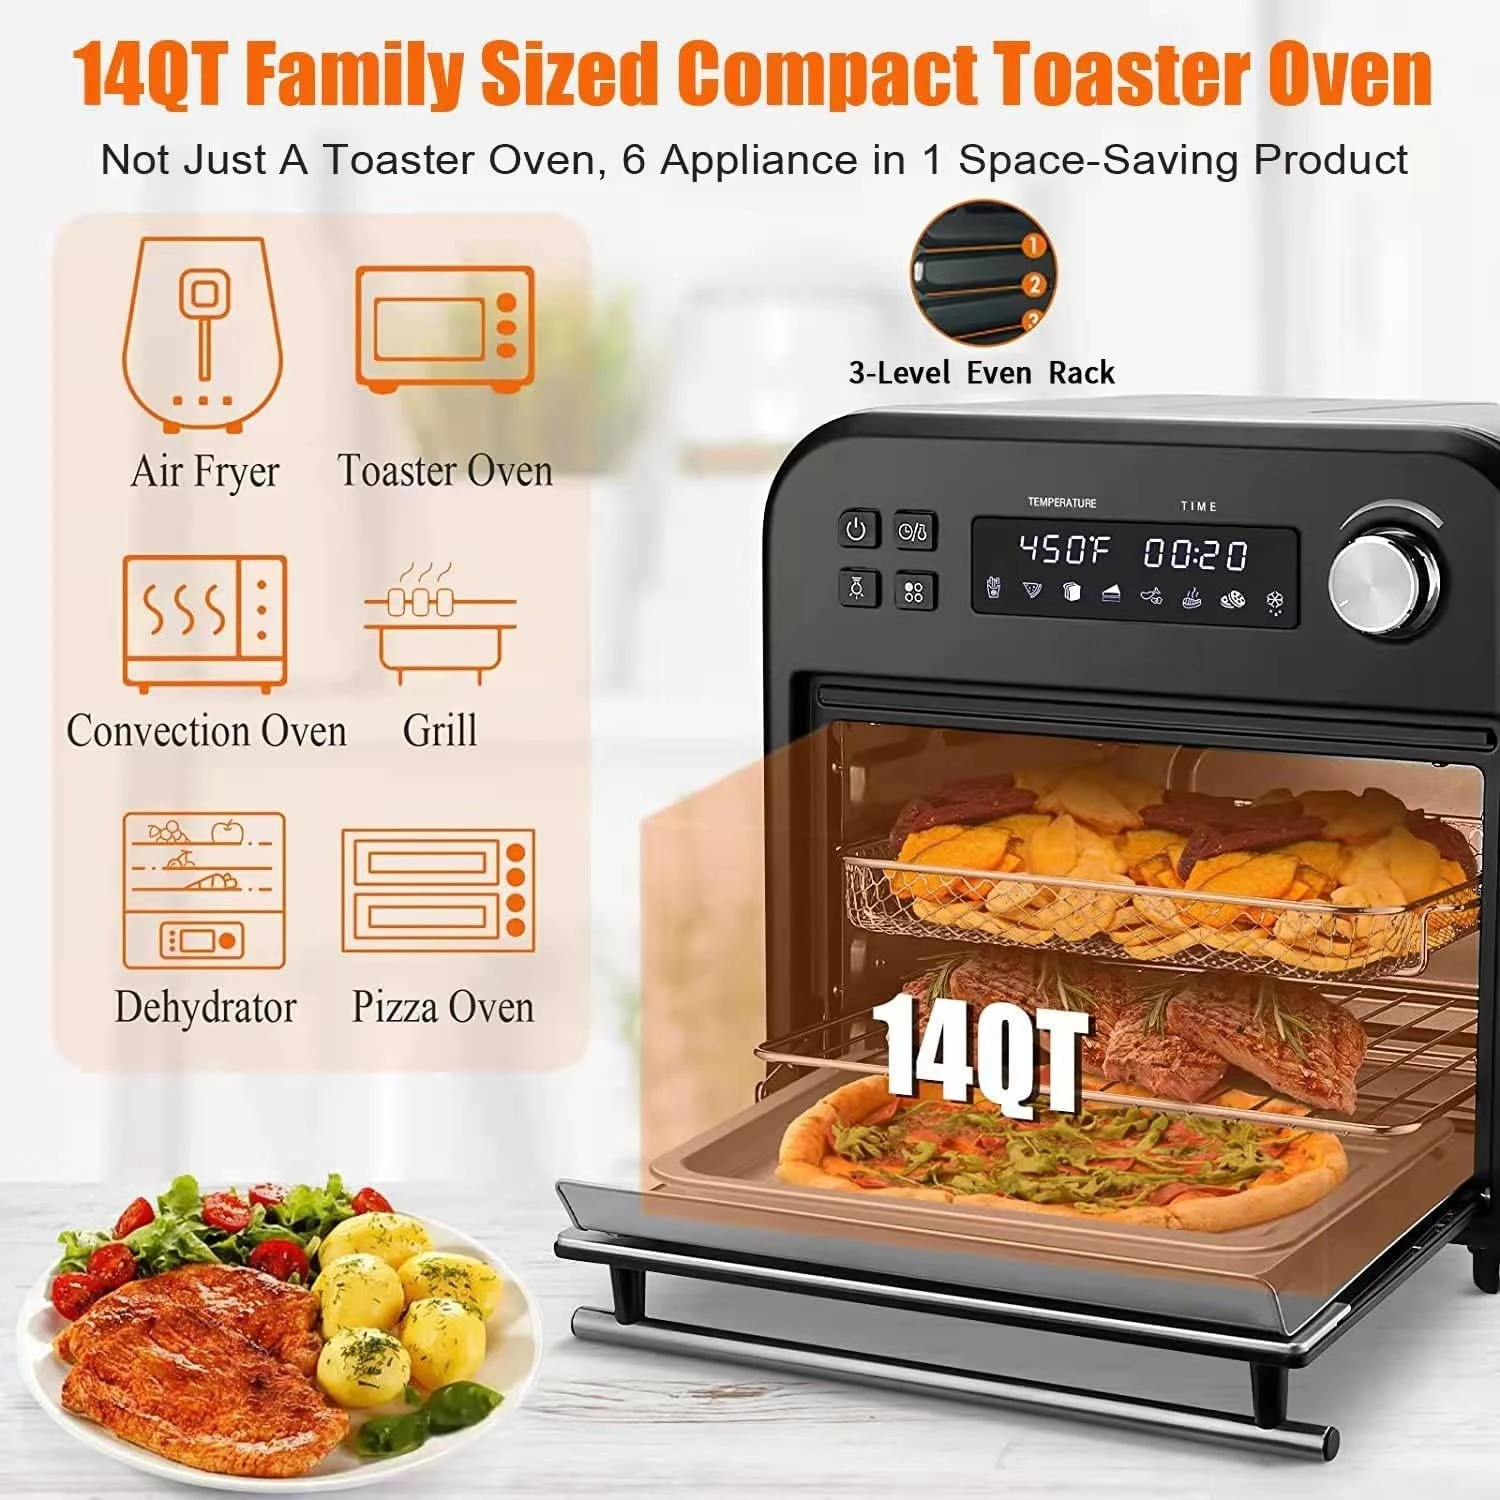 6-in-1 Inverter Microwave Oven Air Fryer Combo, MASTER Series Countertop  Microwave, Healthy Air Fryer, Broil, Convection, Speedy - AliExpress